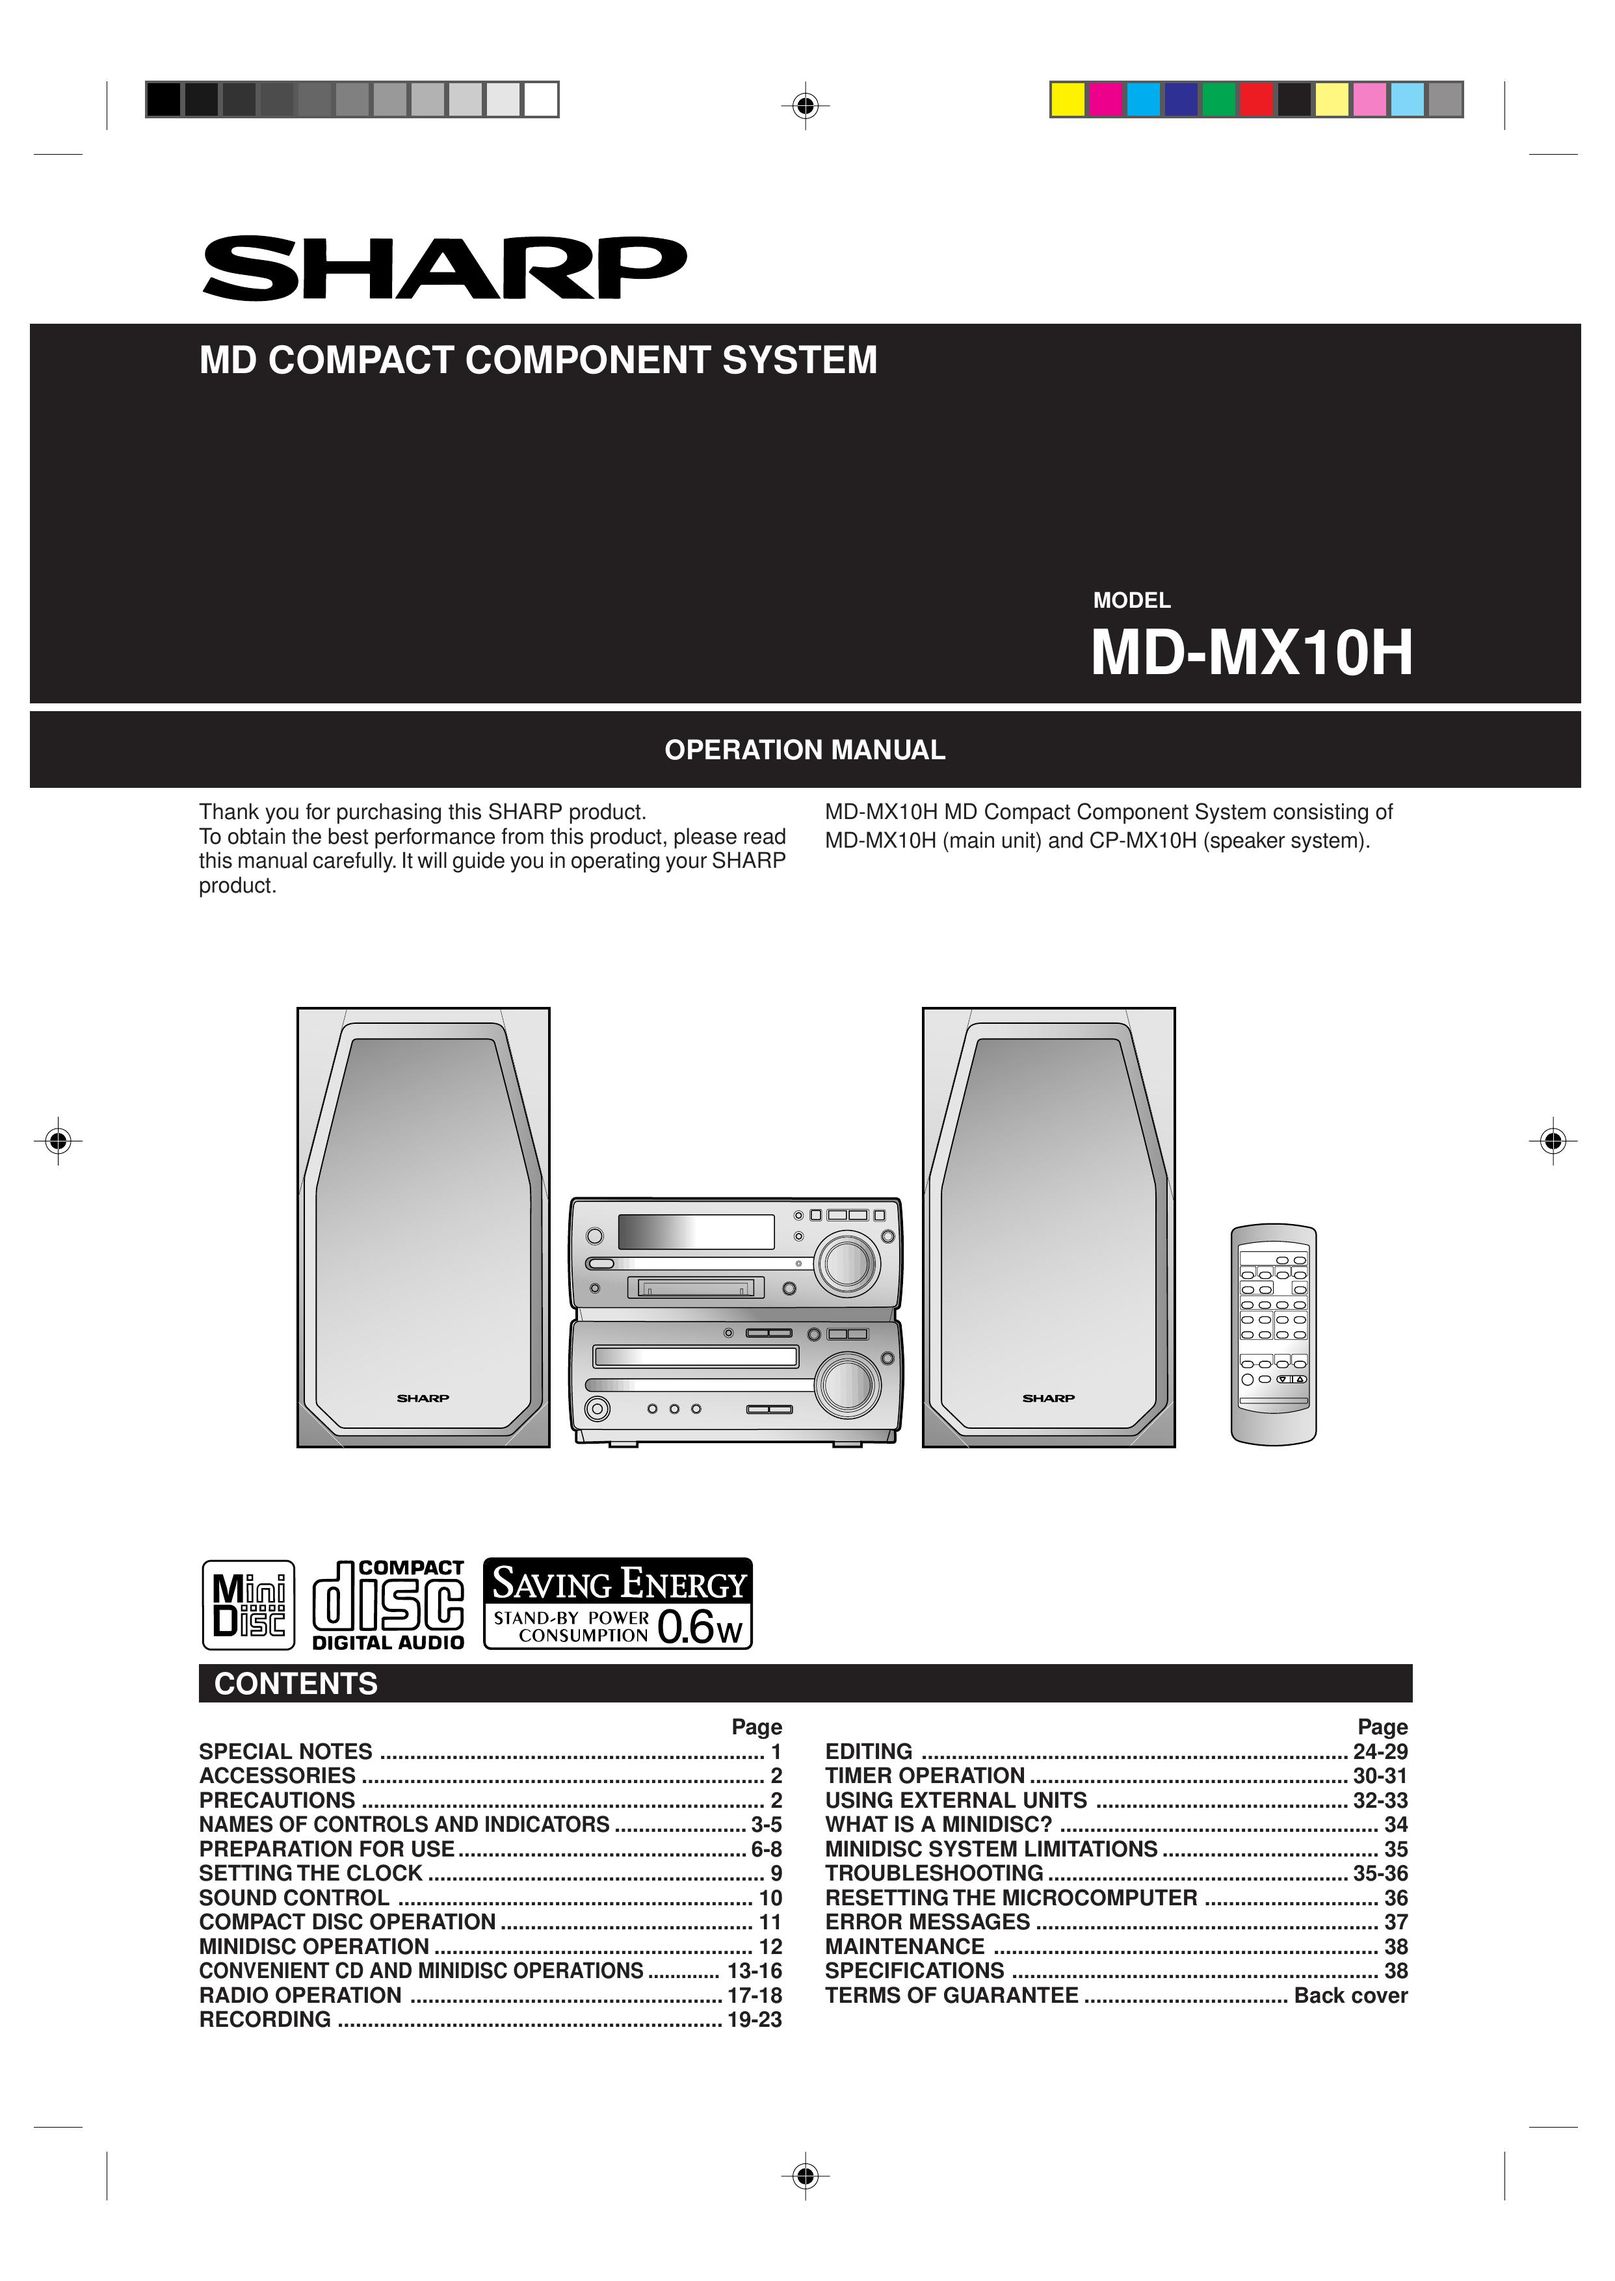 Sharp MD-MX10H Stereo System User Manual